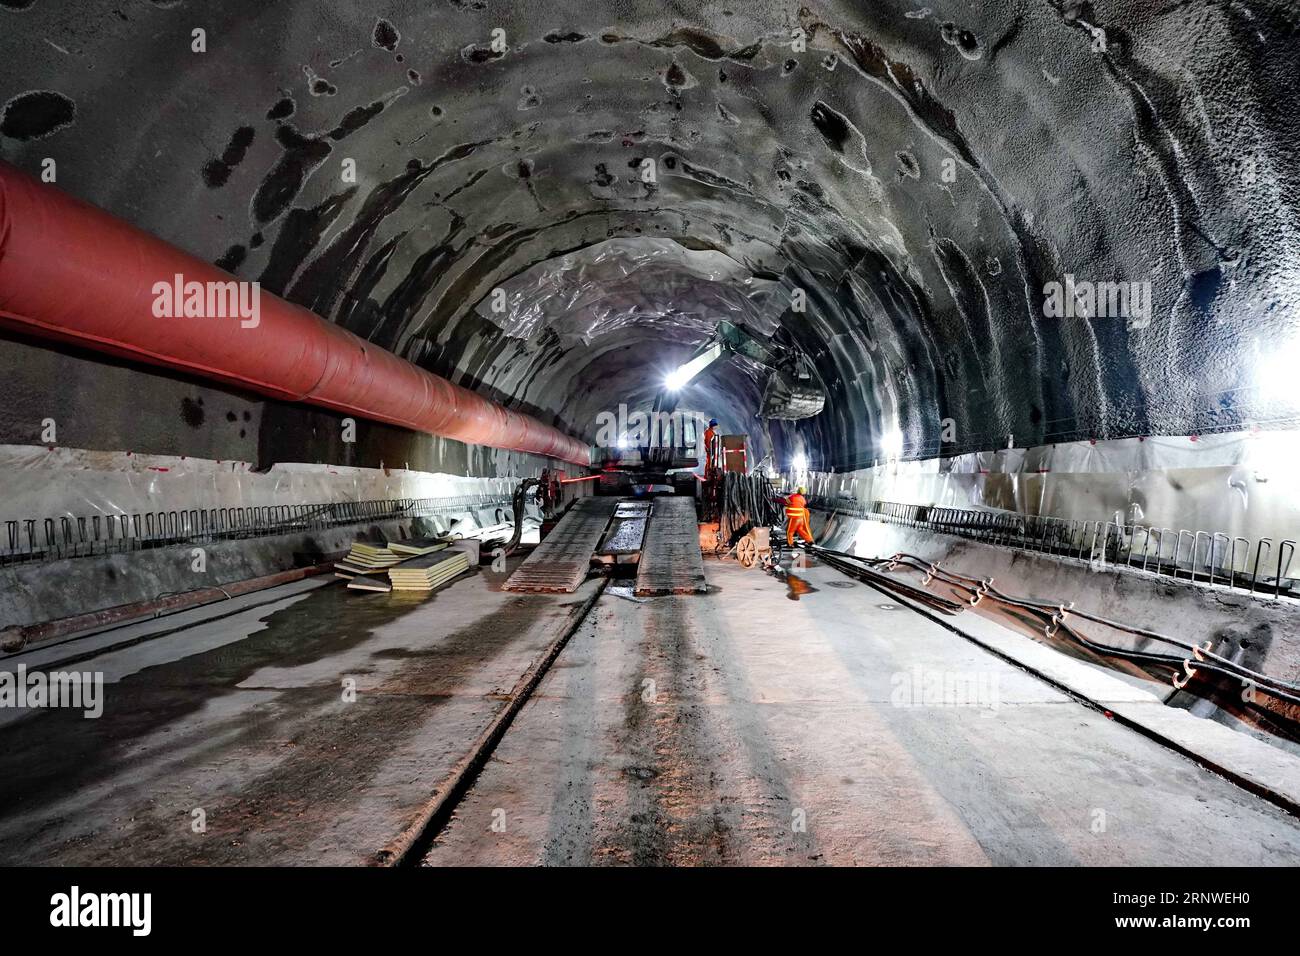 (171217) -- SHIJIAZHUANG, Dec. 17, 2017 -- Photo taken on Dec. 17, 2017 shows the construction site of Zhengpantai tunnel of an extension line of the Beijing-Zhangjiakou high-speed railway in north China s Hebei Province. The 52-km extension of the Beijing-Zhangjiakou railway to Hebei s Chongli District, where most of the 2022 Olympic skiing events will be held, is expected to be completed by the end of 2019. ) (wf) CHINA-HEBEI-BEIJING-ZHANGJIAKOU RAILWAY-CONSTRUCTION (CN) YangxShiyao PUBLICATIONxNOTxINxCHN Stock Photo